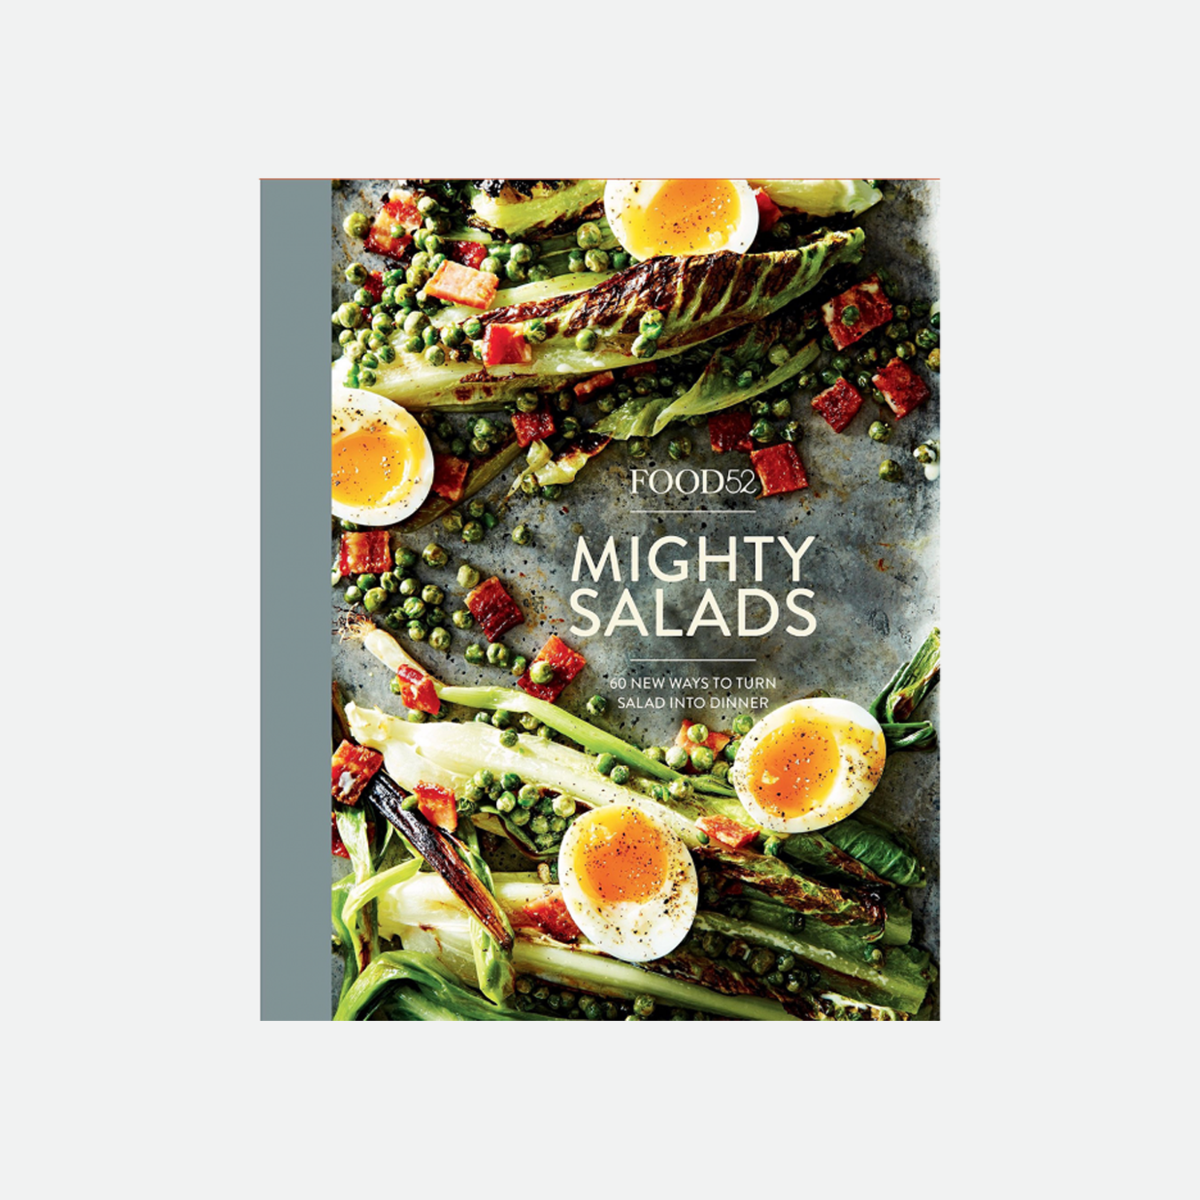 Mighty Salads By Food52 (9780399578045)